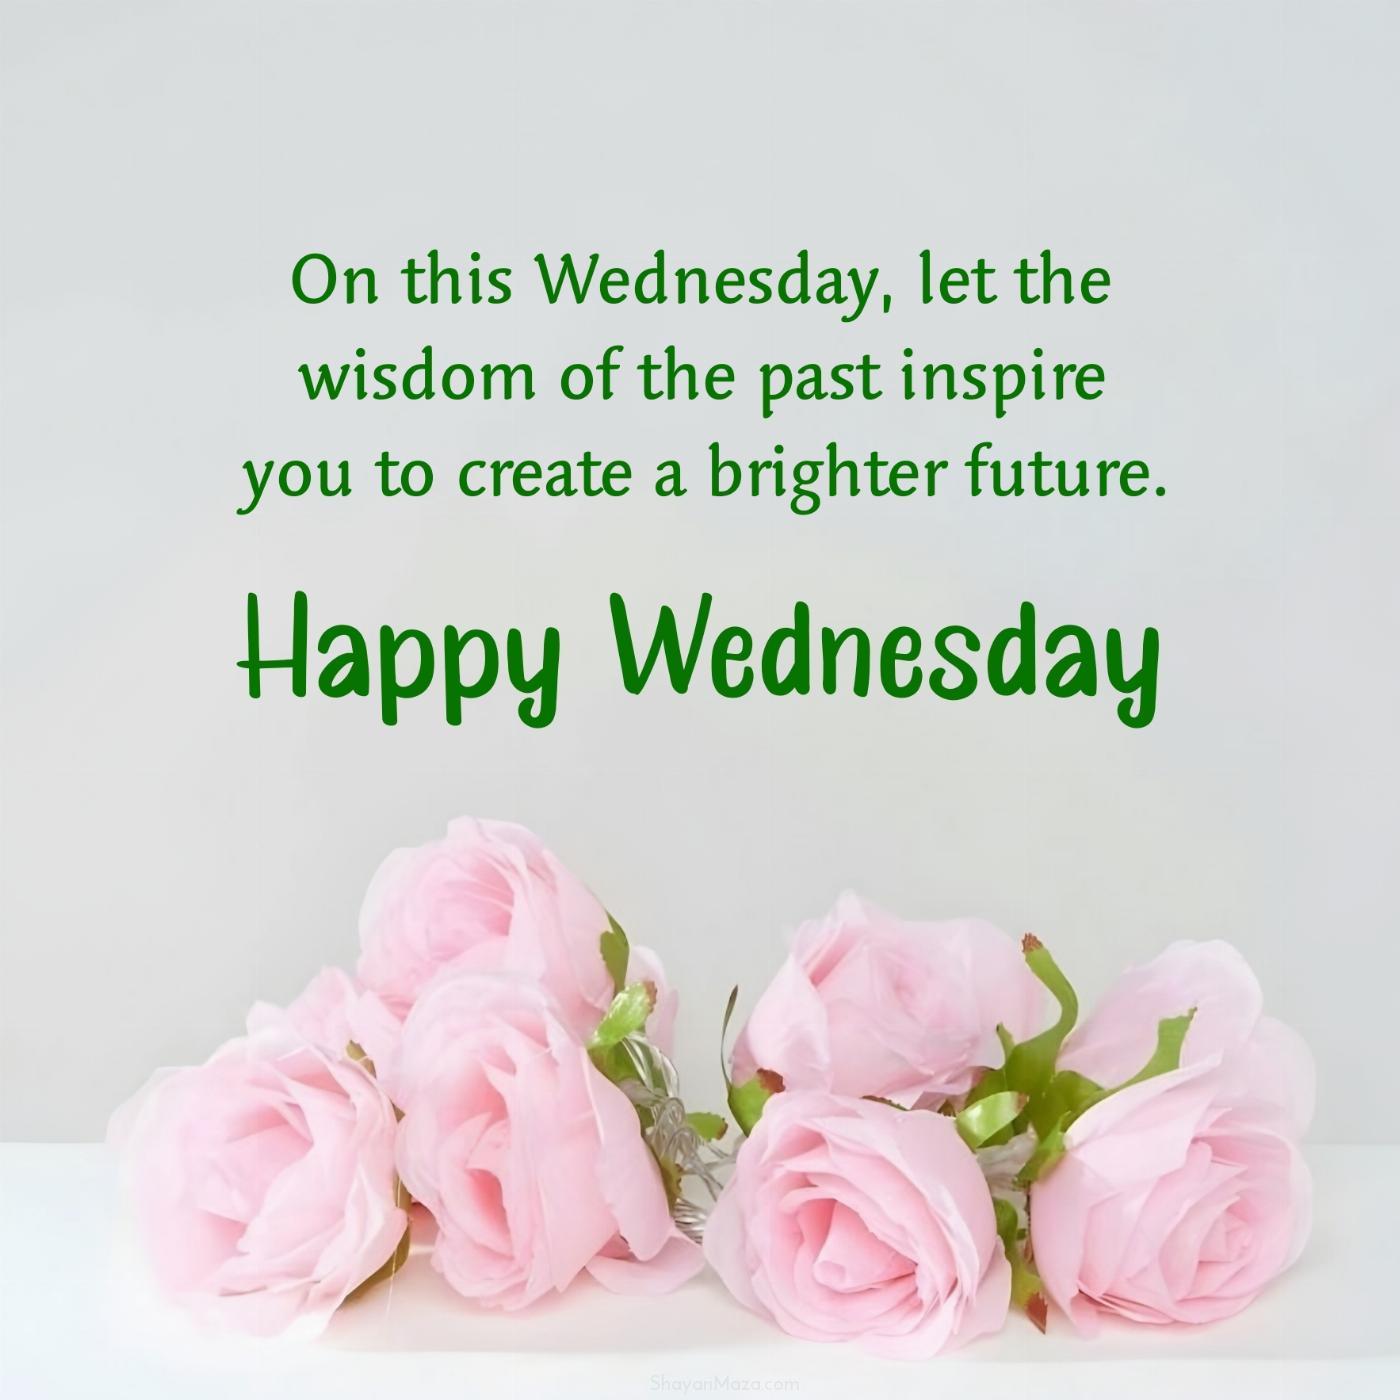 On this Wednesday let the wisdom of the past inspire you to create a brighter future